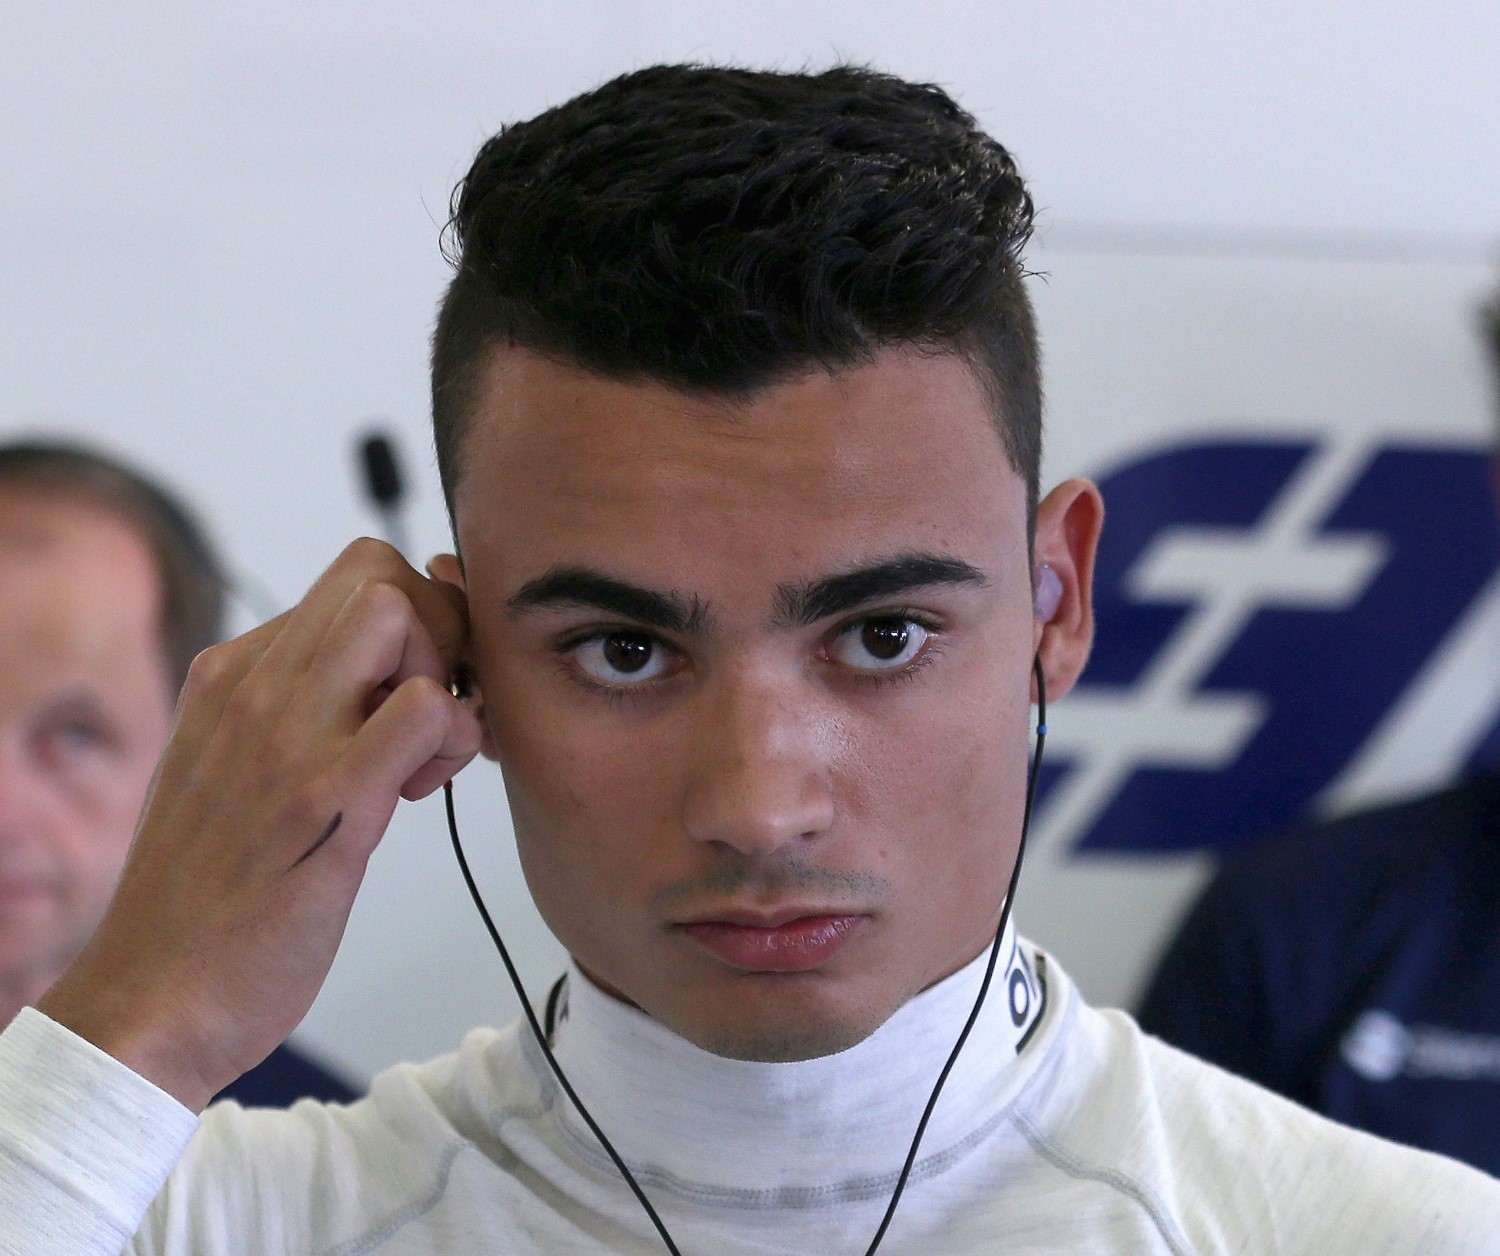 Wehrlein has failed to impress in F1 but Wolff still back him